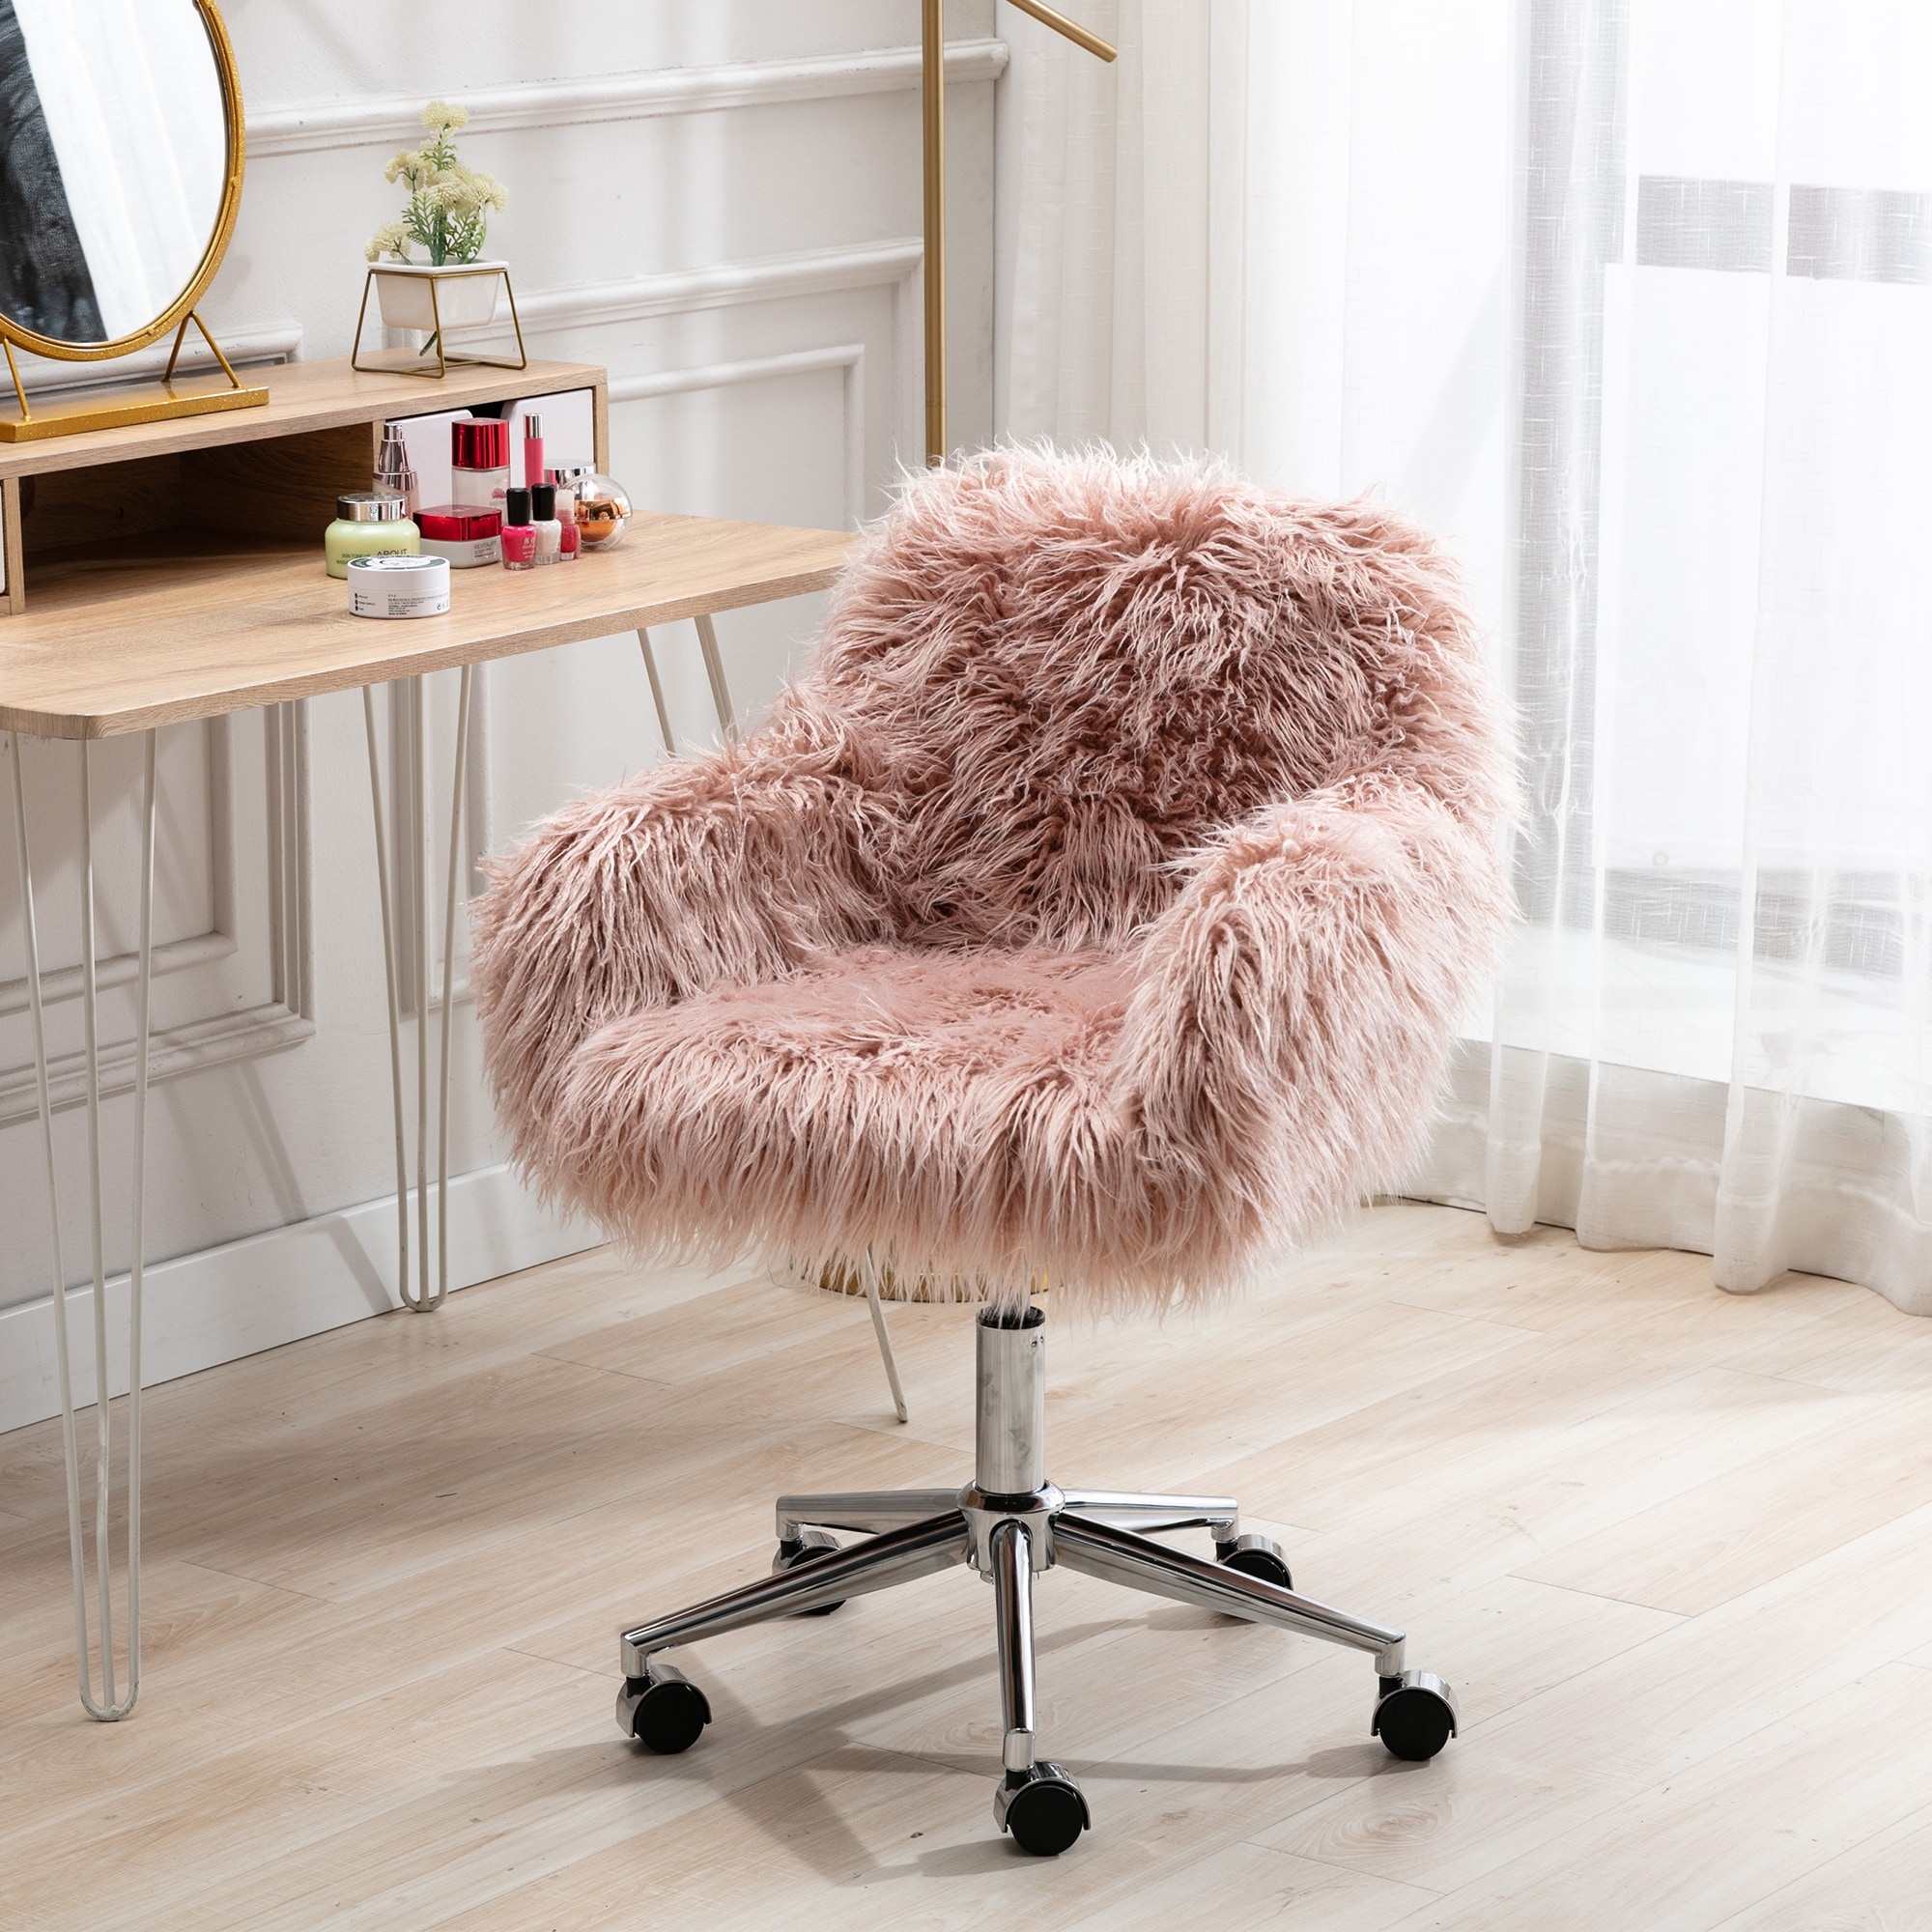 https://ak1.ostkcdn.com/images/products/is/images/direct/74bf75469b68cbdf5bd68186b845b50eb887335f/Modern-Fake-fur-home-office-chair%2C-fluffy-chair-for-girls%2C-makeup-vanity-Chair-with-Gold---Silver-Plating-Base.jpg